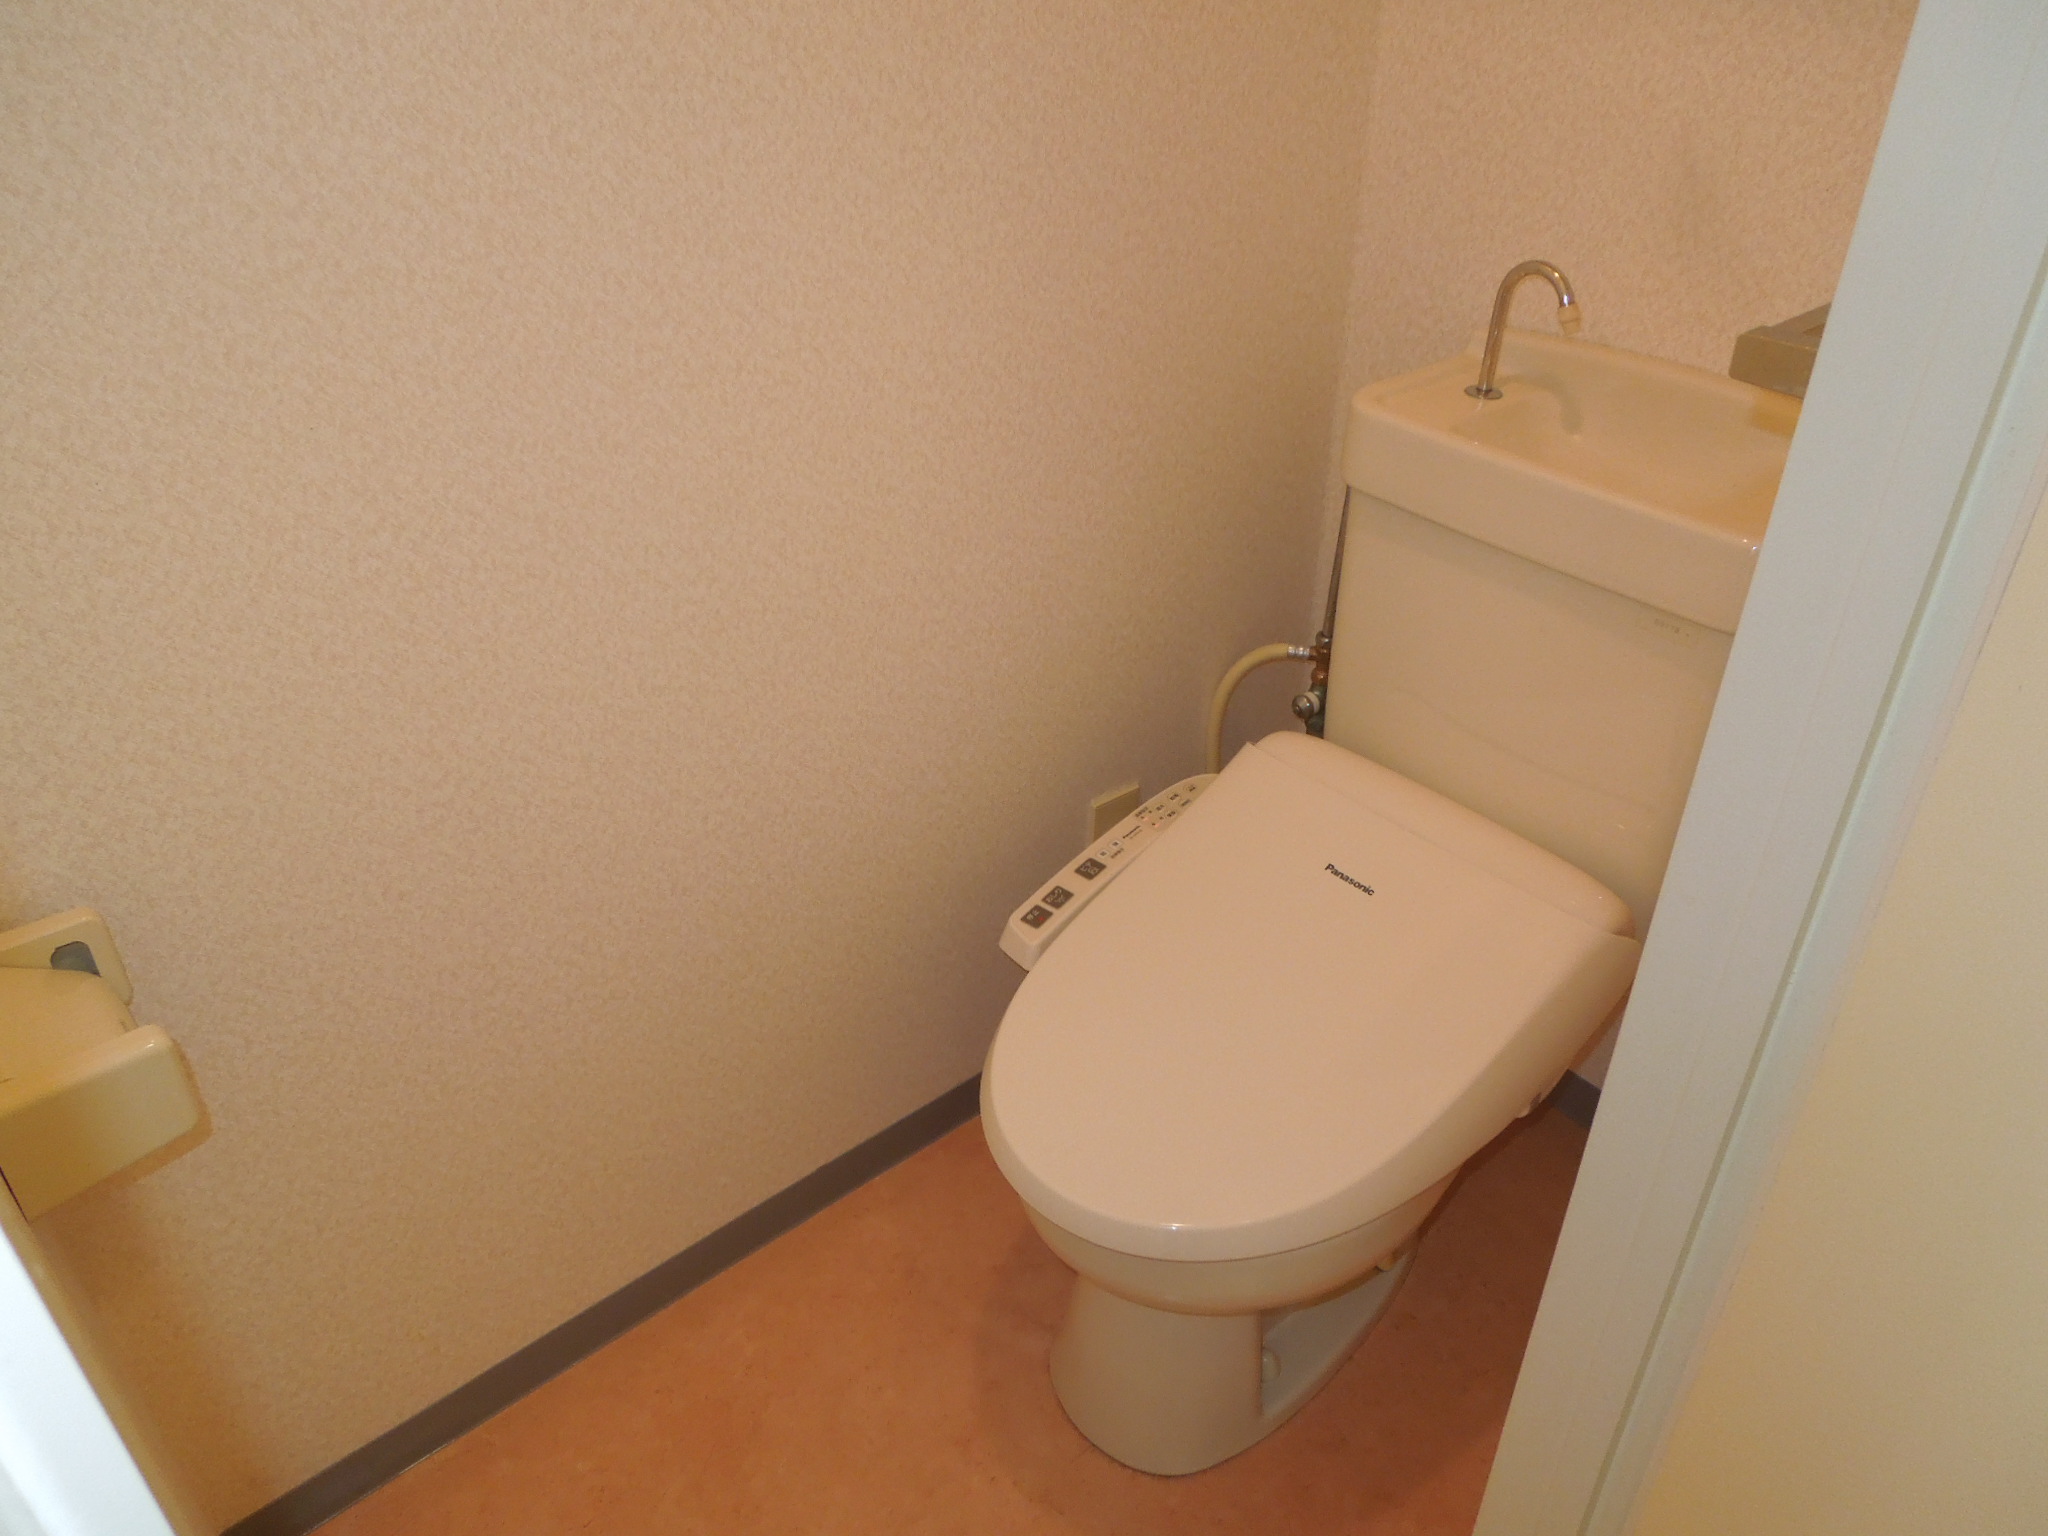 Toilet. 202, Room reference